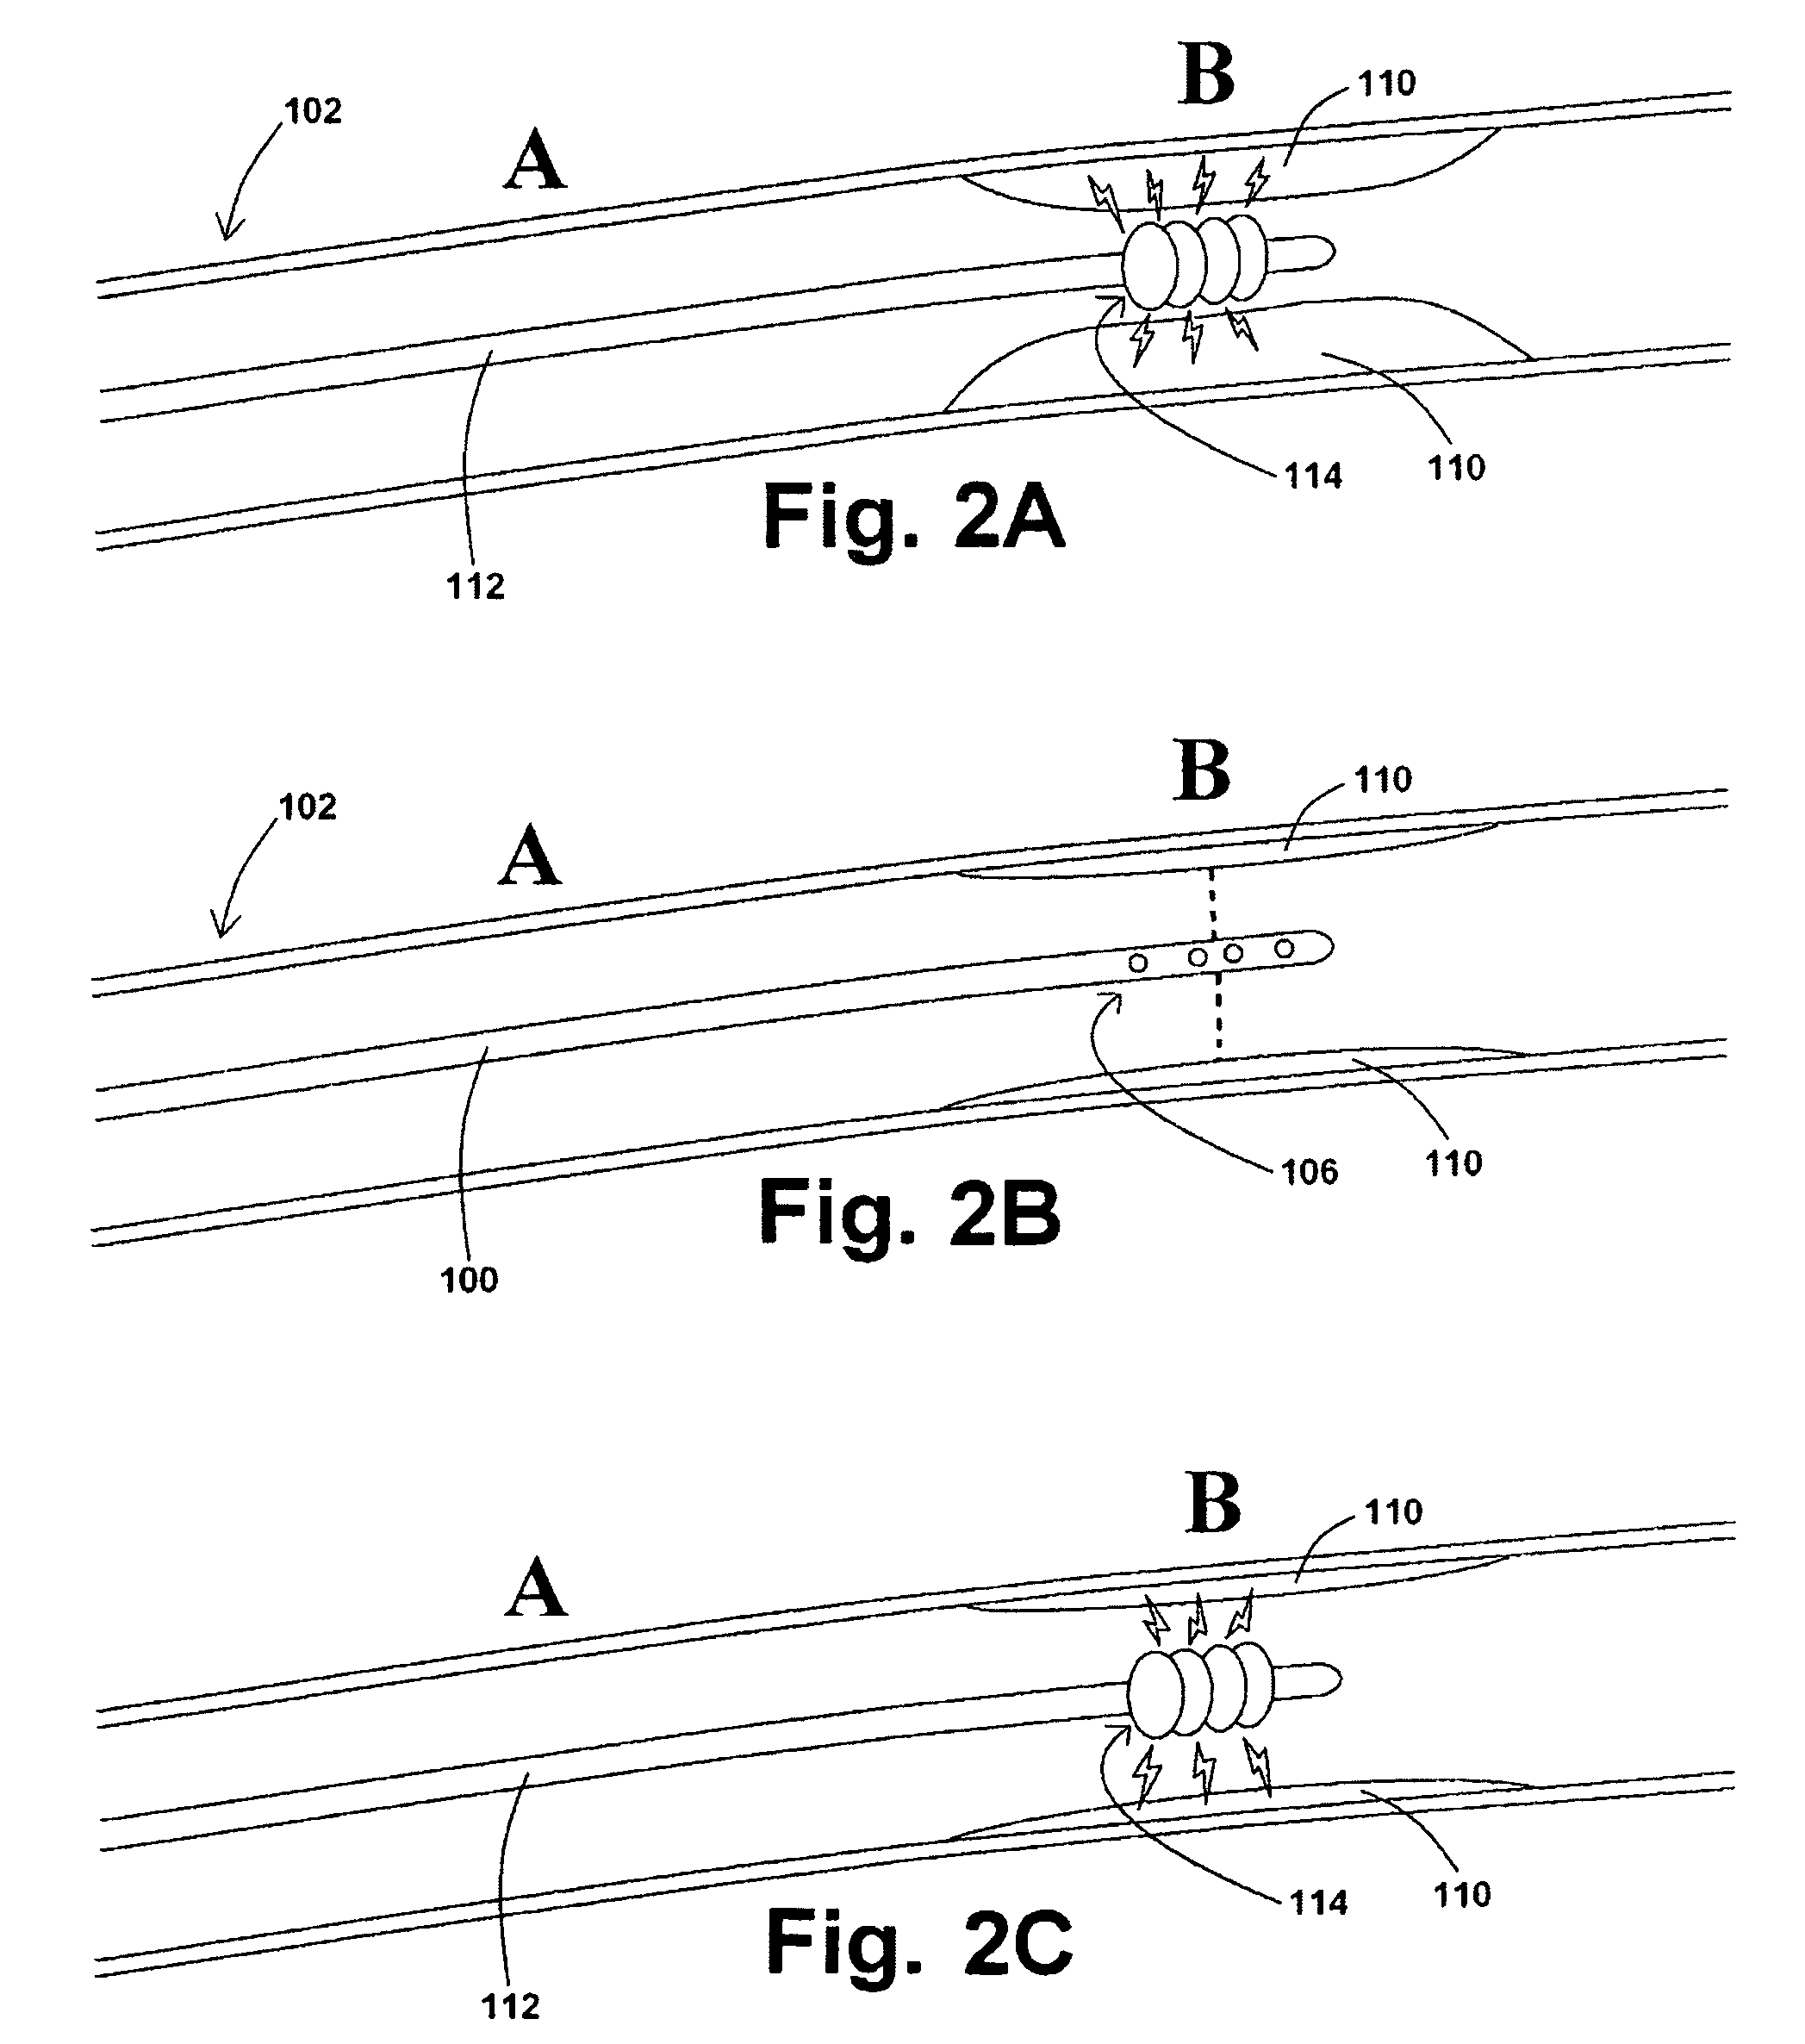 Devices, systems, and methods for removing stenotic lesions from vessels